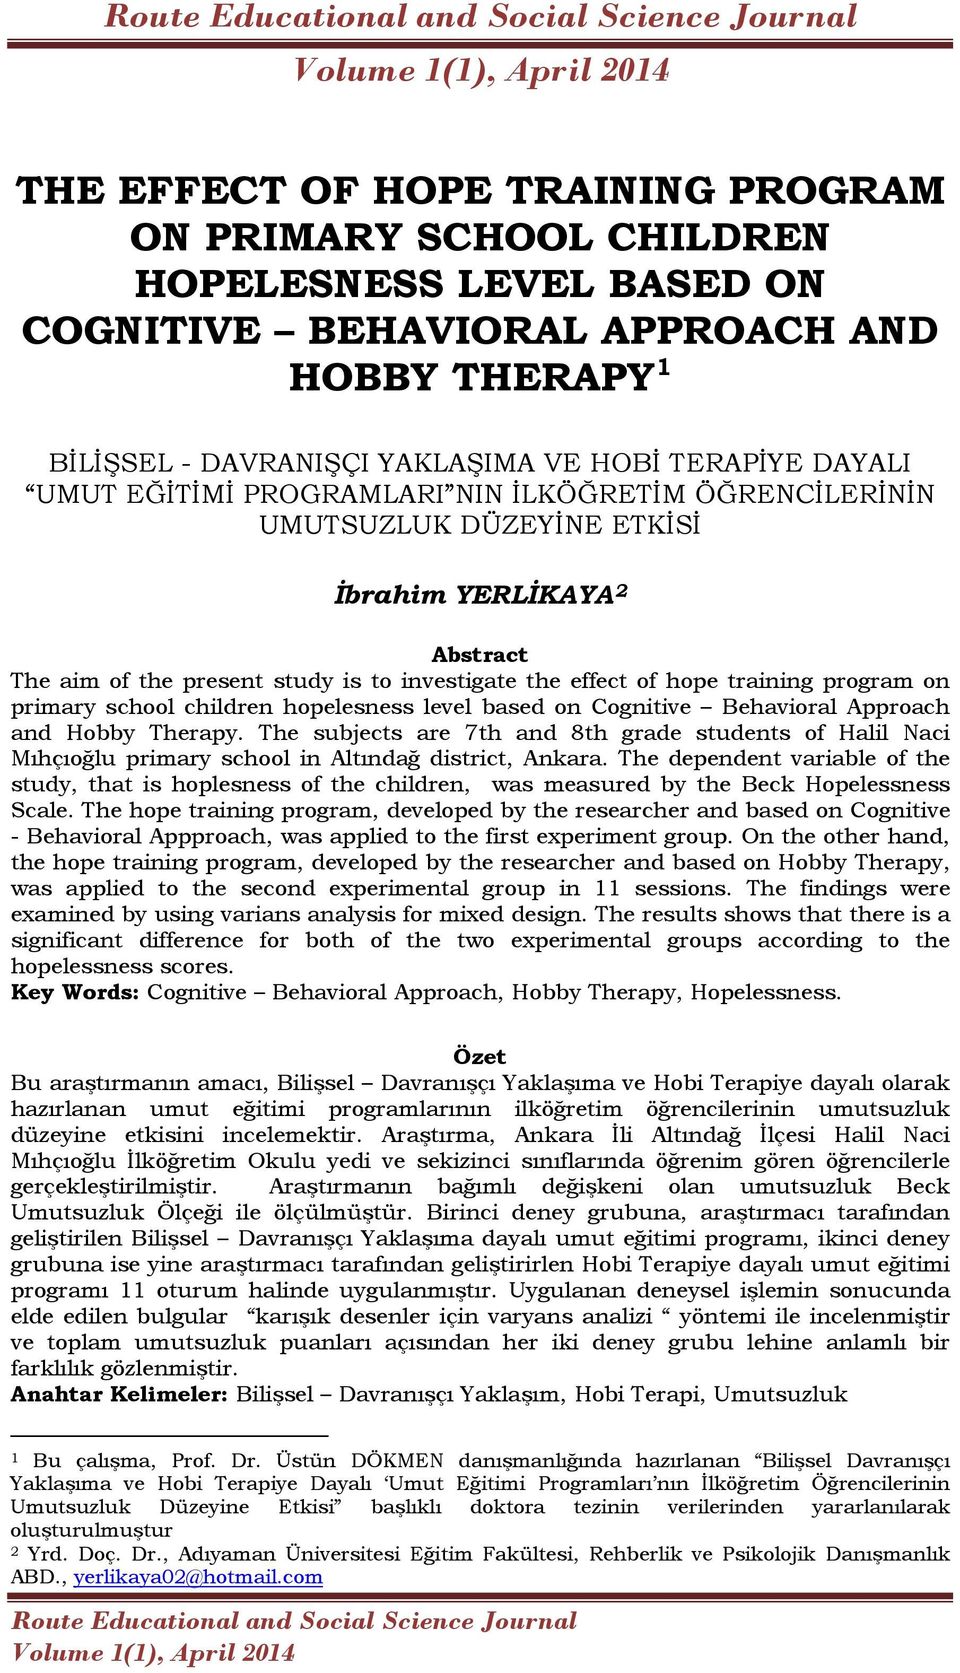 primary school children hopelesness level based on Cognitive Behavioral Approach and Hobby Therapy.